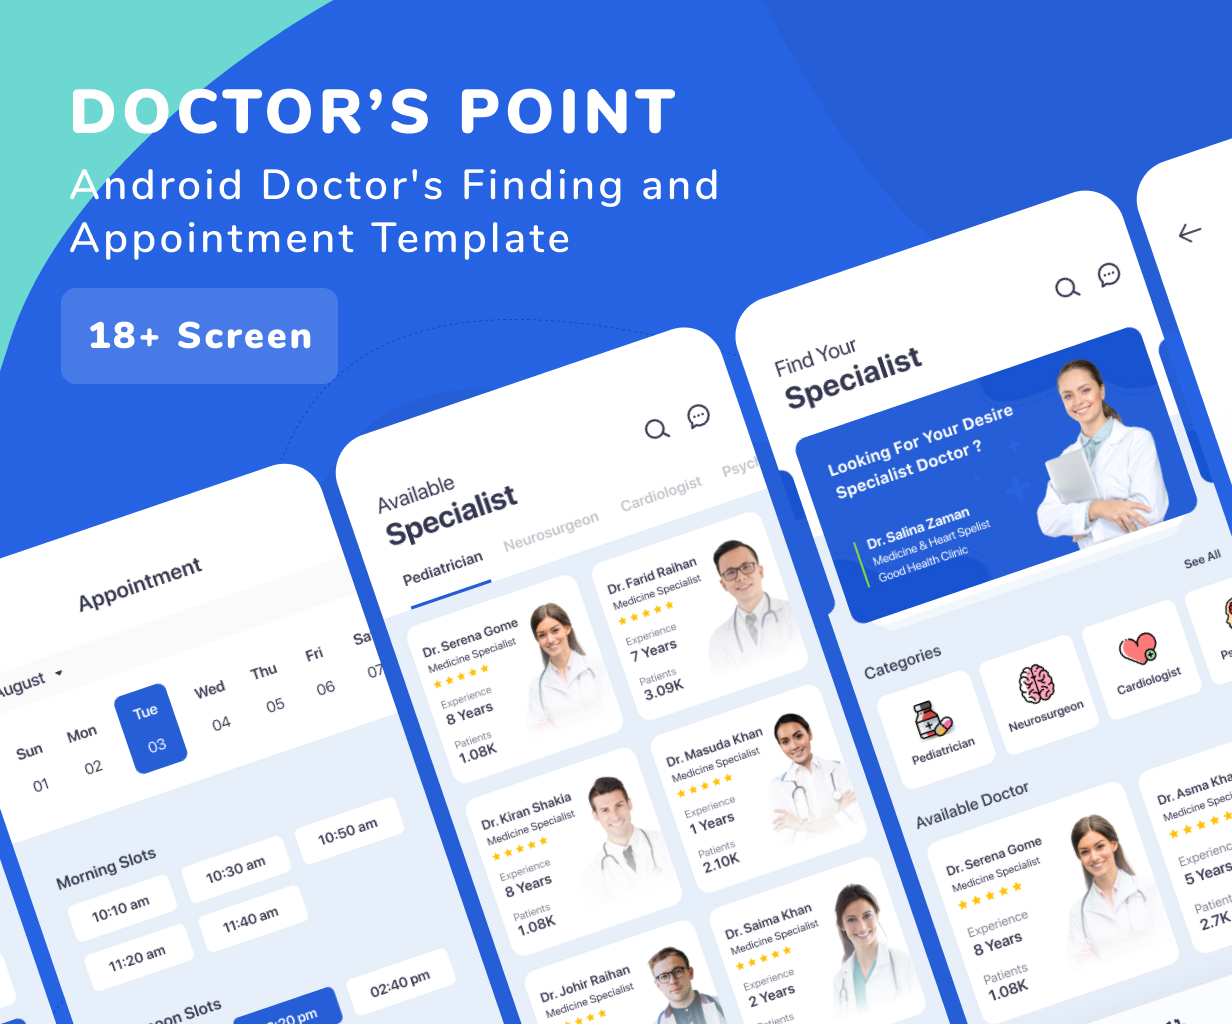 Doctor's Point - Android Doctor's Finding and Appointment Template - 2